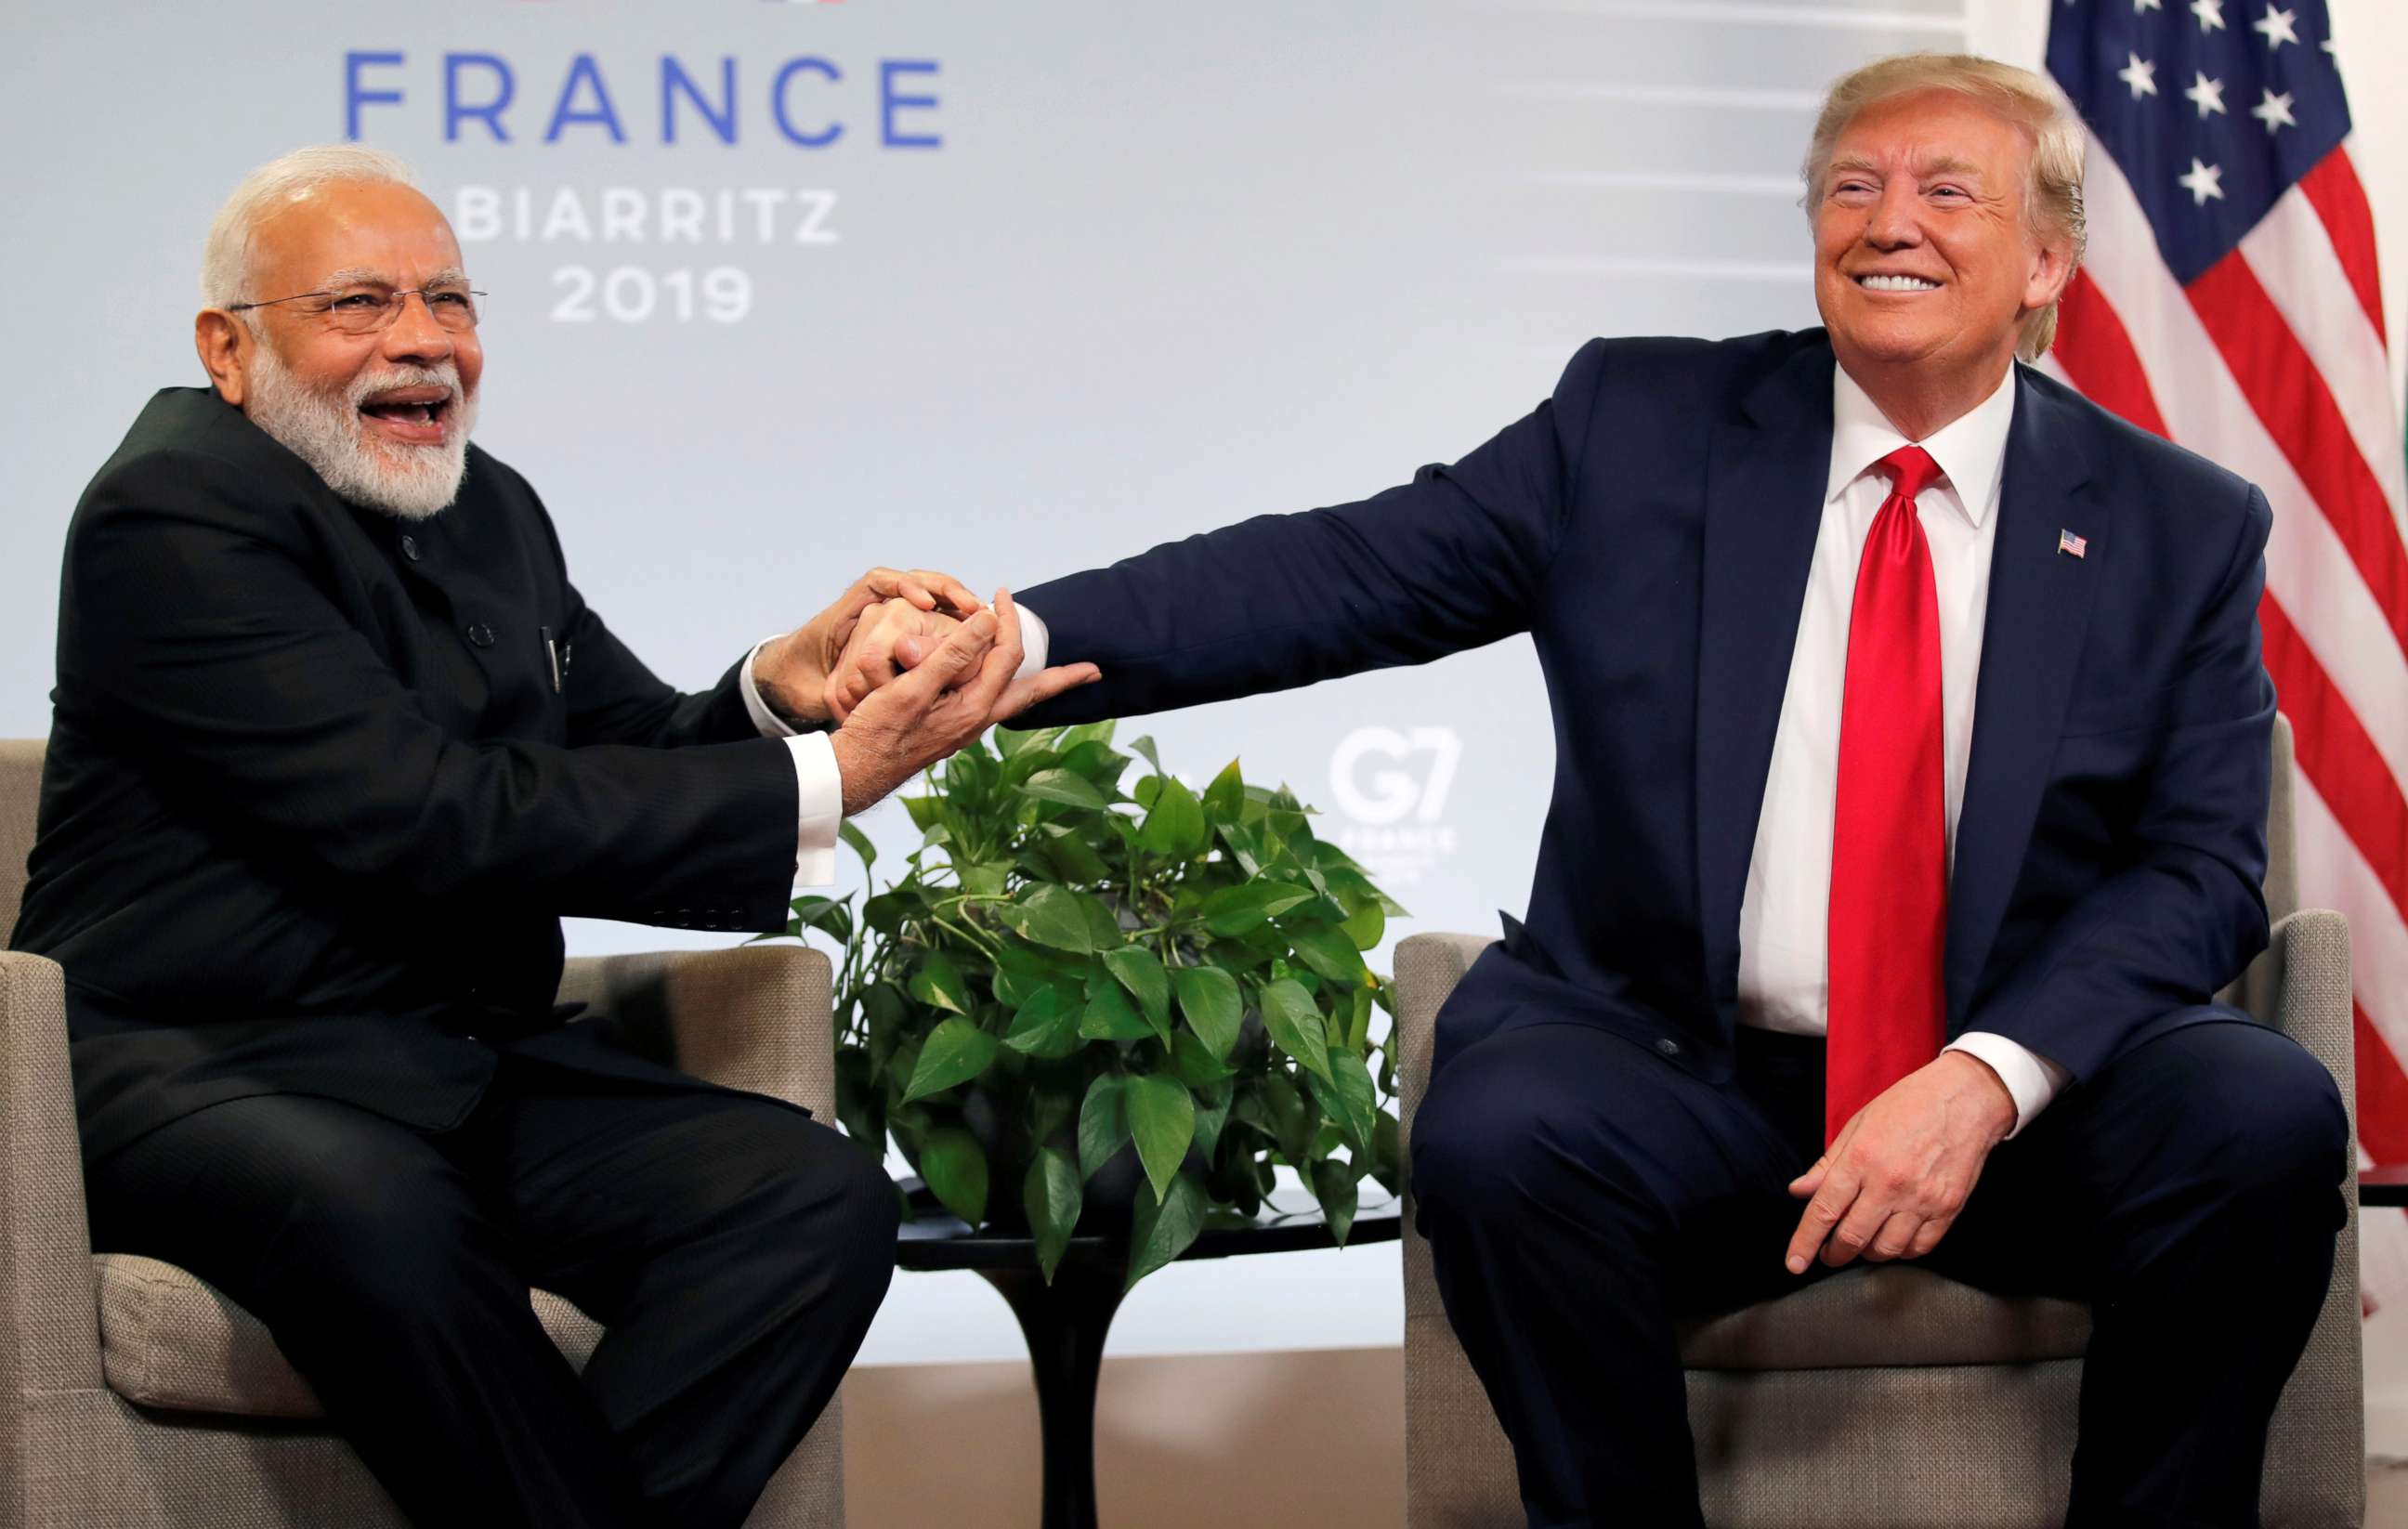 PHOTO: President Donald Trump meets Indian Prime Minister Narendra Modi for bilateral talks during the G7 summit in Biarritz, France, Aug. 26, 2019.